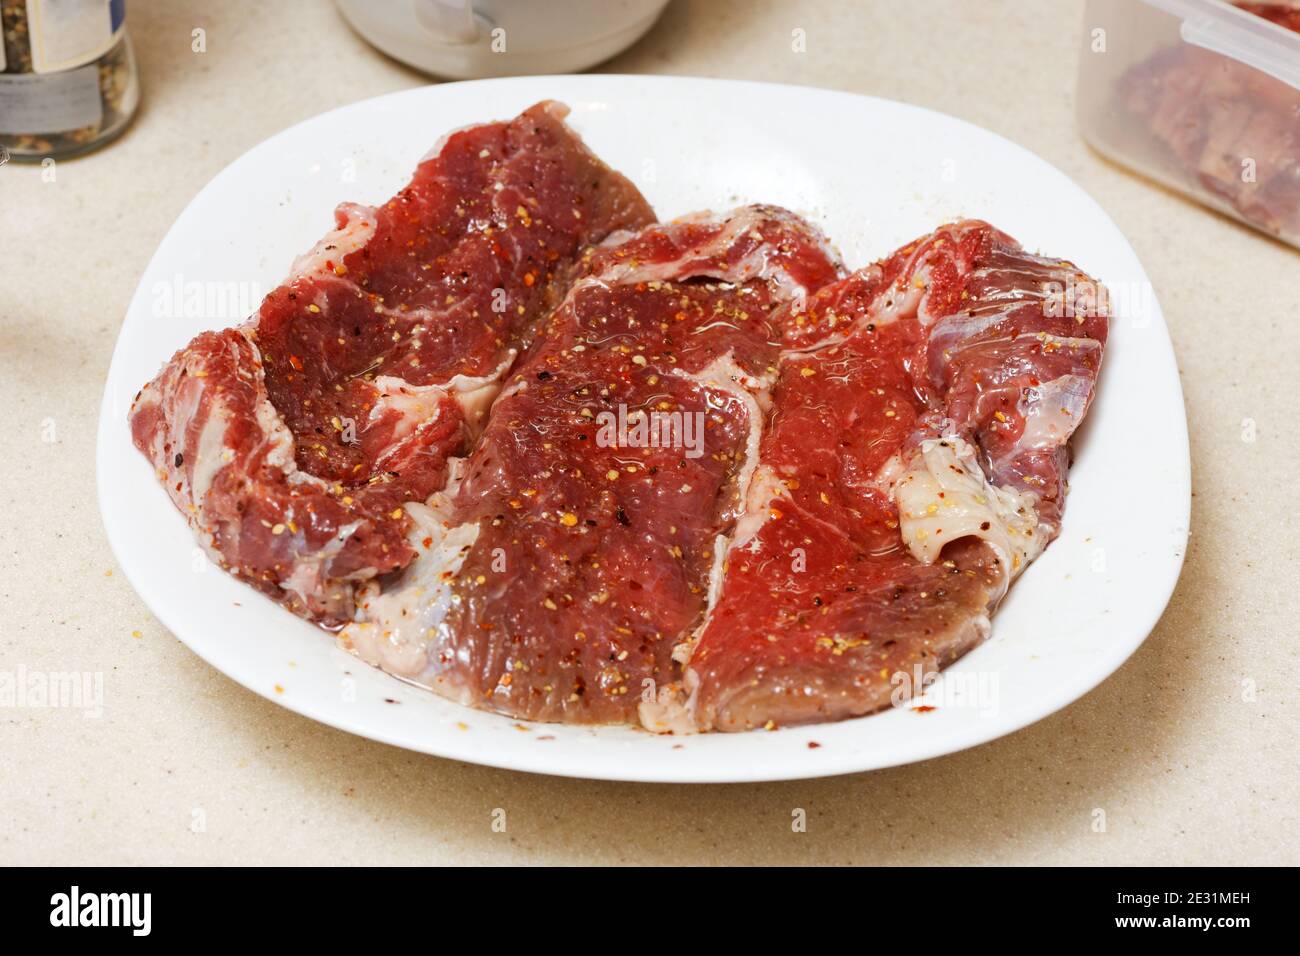 Pieces of raw meat smeared with spices on white dish before frying Stock Photo